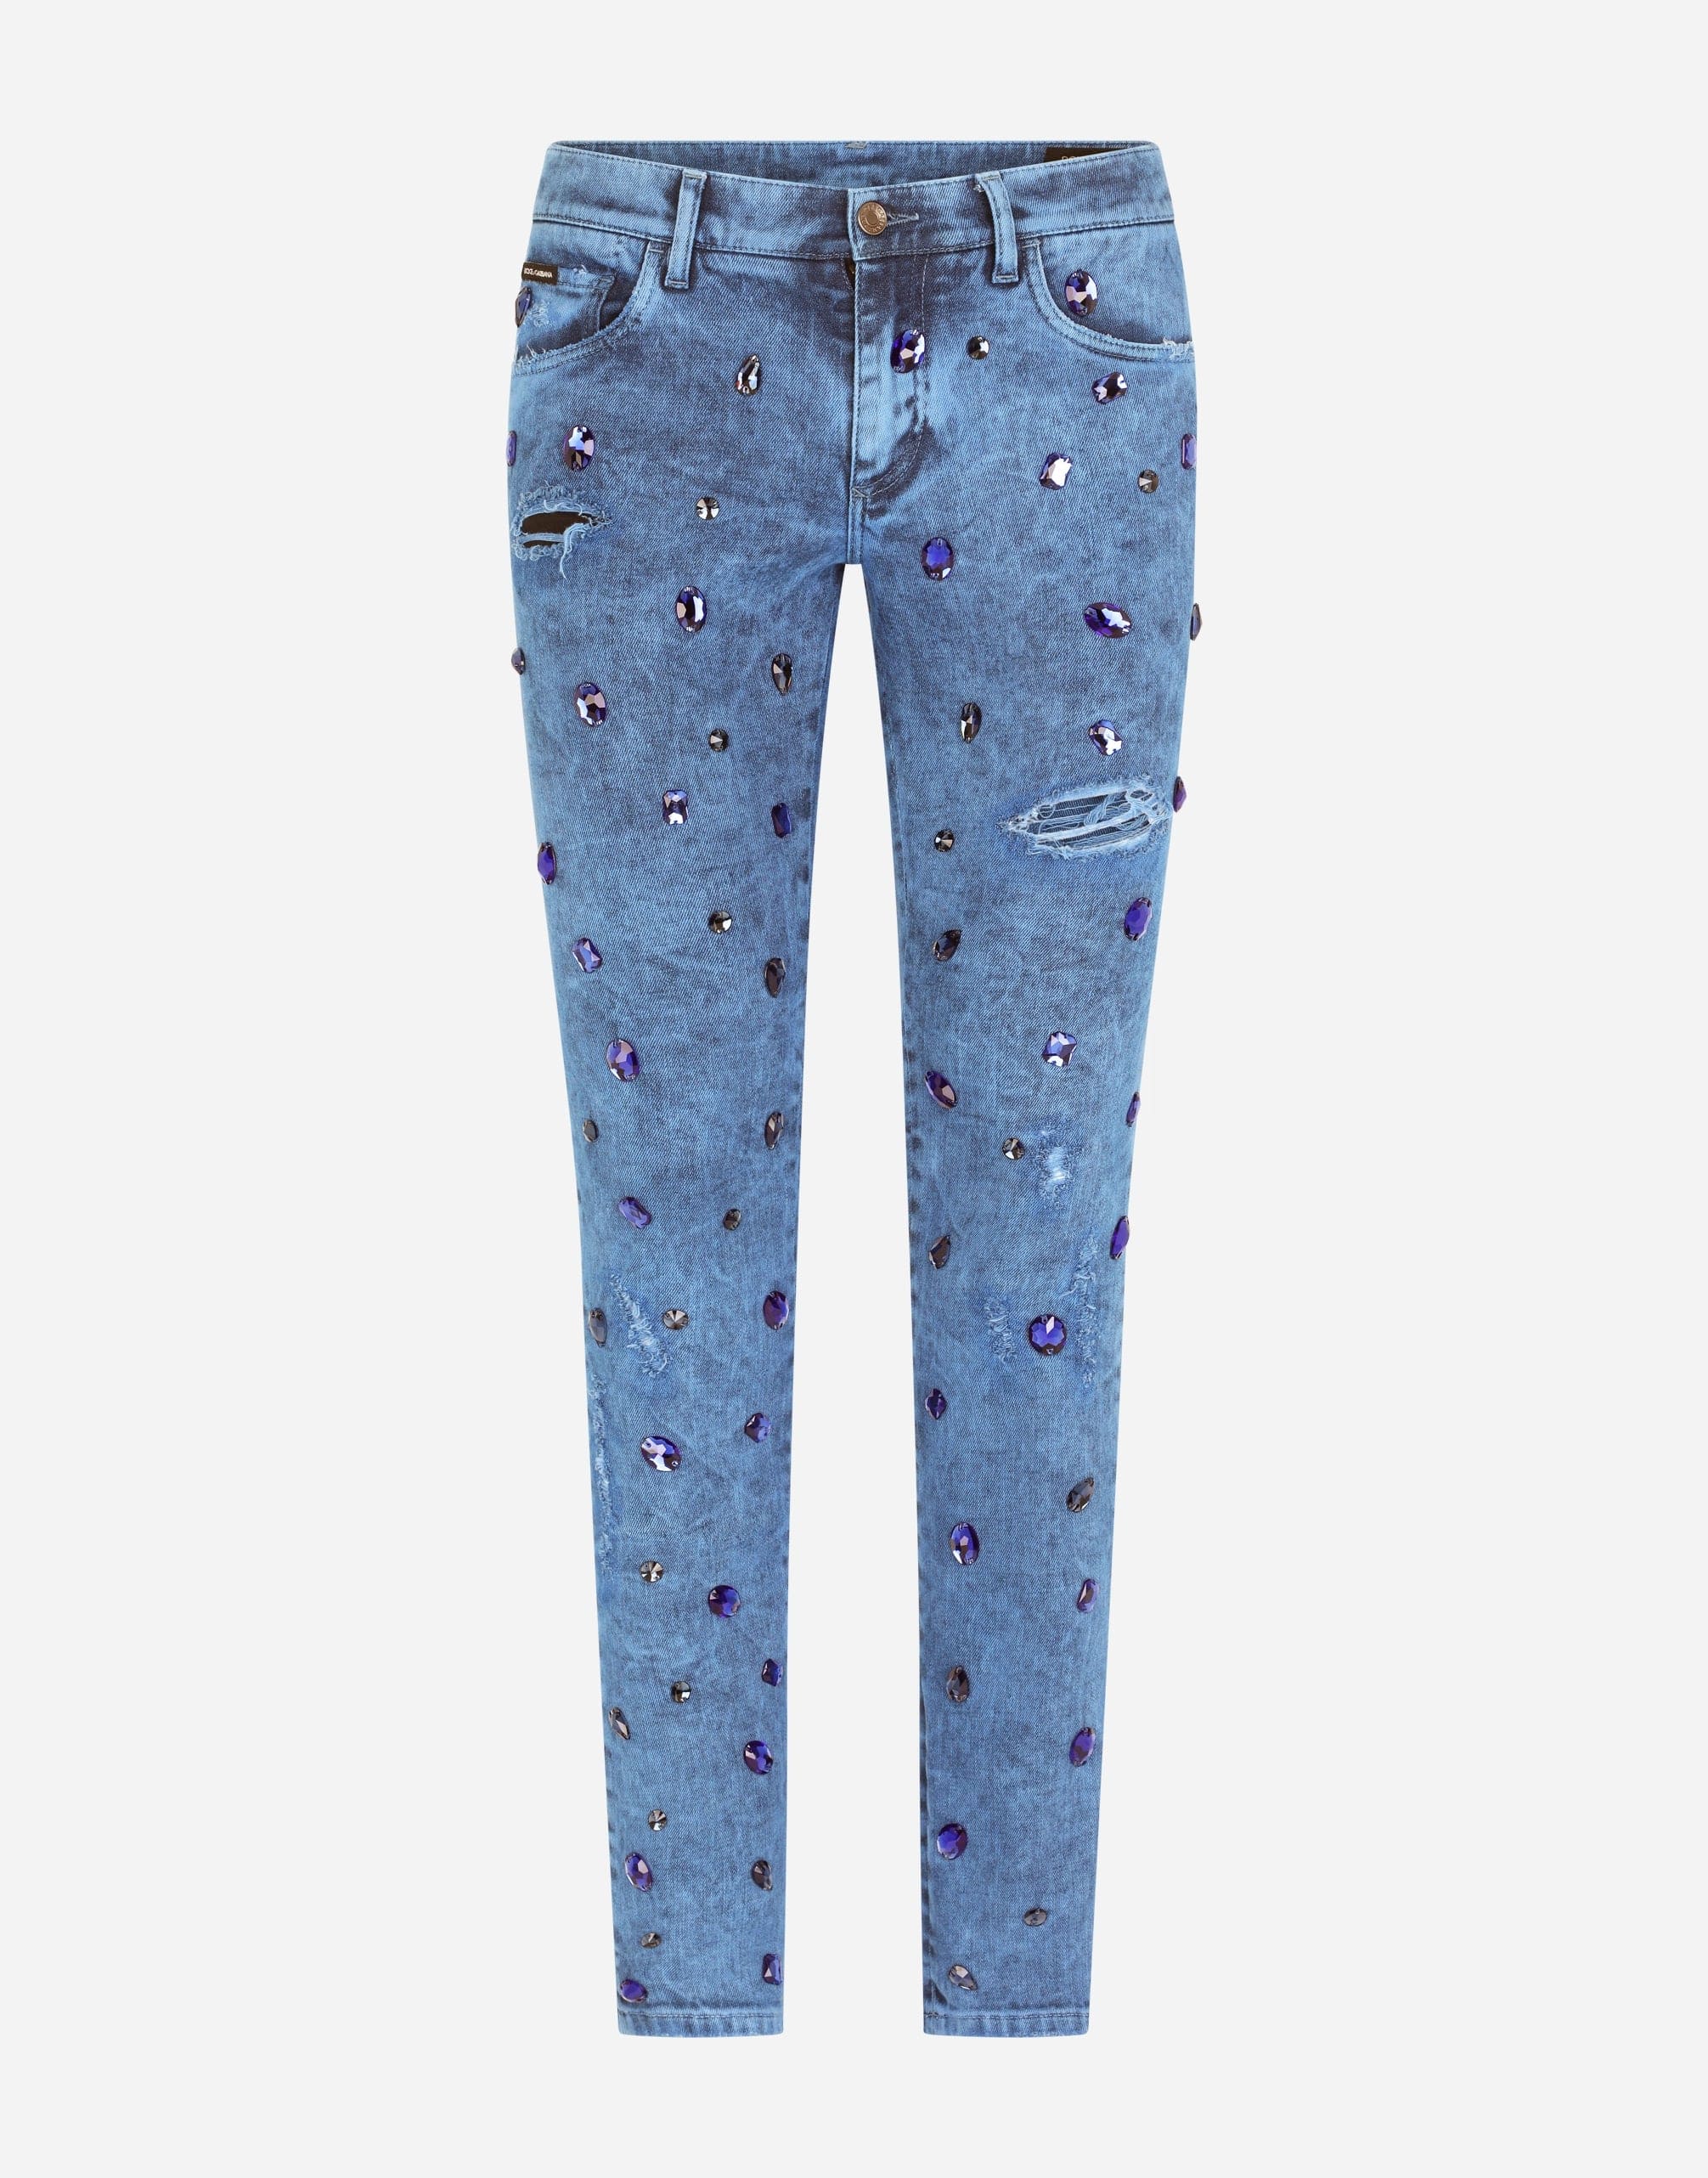 Dolce & Gabbana Over-Dyed Skinny Stretch Jeans With Crystals